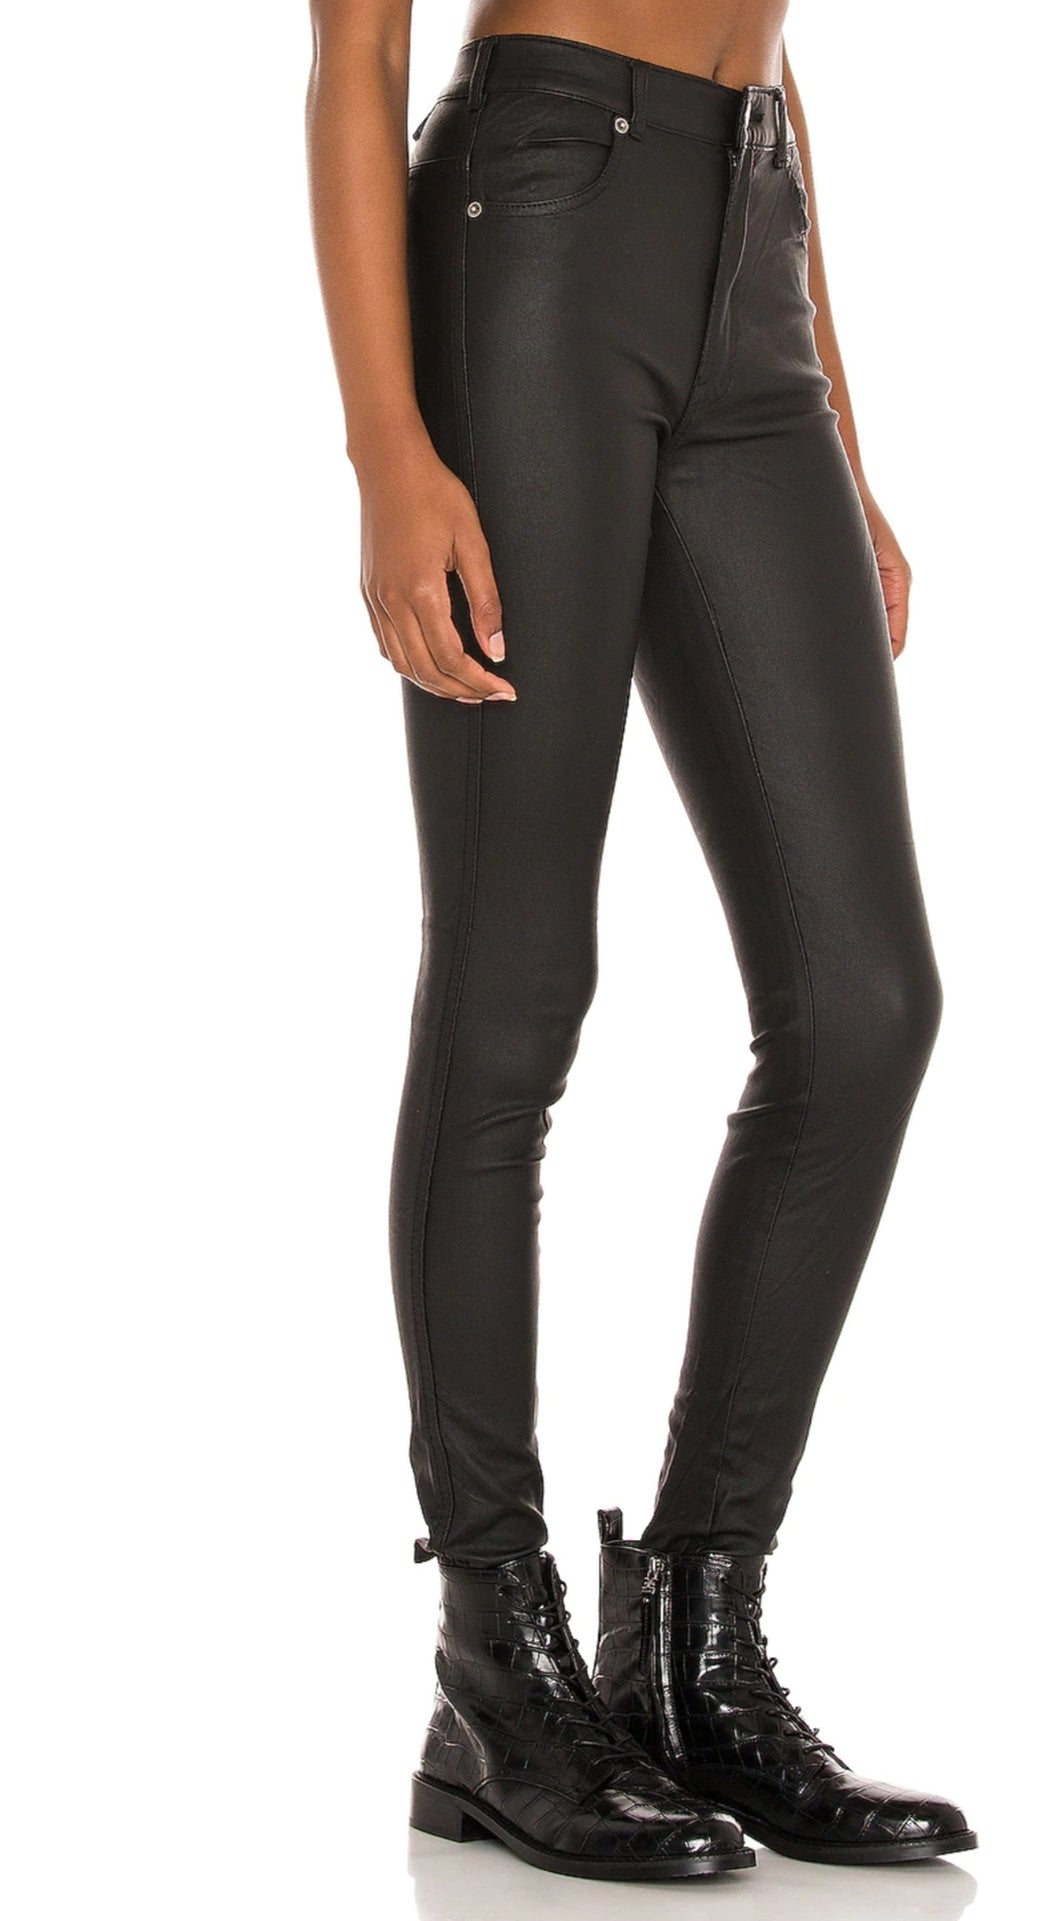 Flex your style in these cute Lex Skinny Wax Coated Denim Black Jeans the liquid wax coating design gives these jeans a chic look. Perfect for styling any and every way you want! These jeans come in a high rise fit featuring 5 pocket, zip and button closure. You can pair these with our black crop tank top, and chic fashion blazer or a graphic tee and high heels or combat boots and of course a handbag for a complete look!